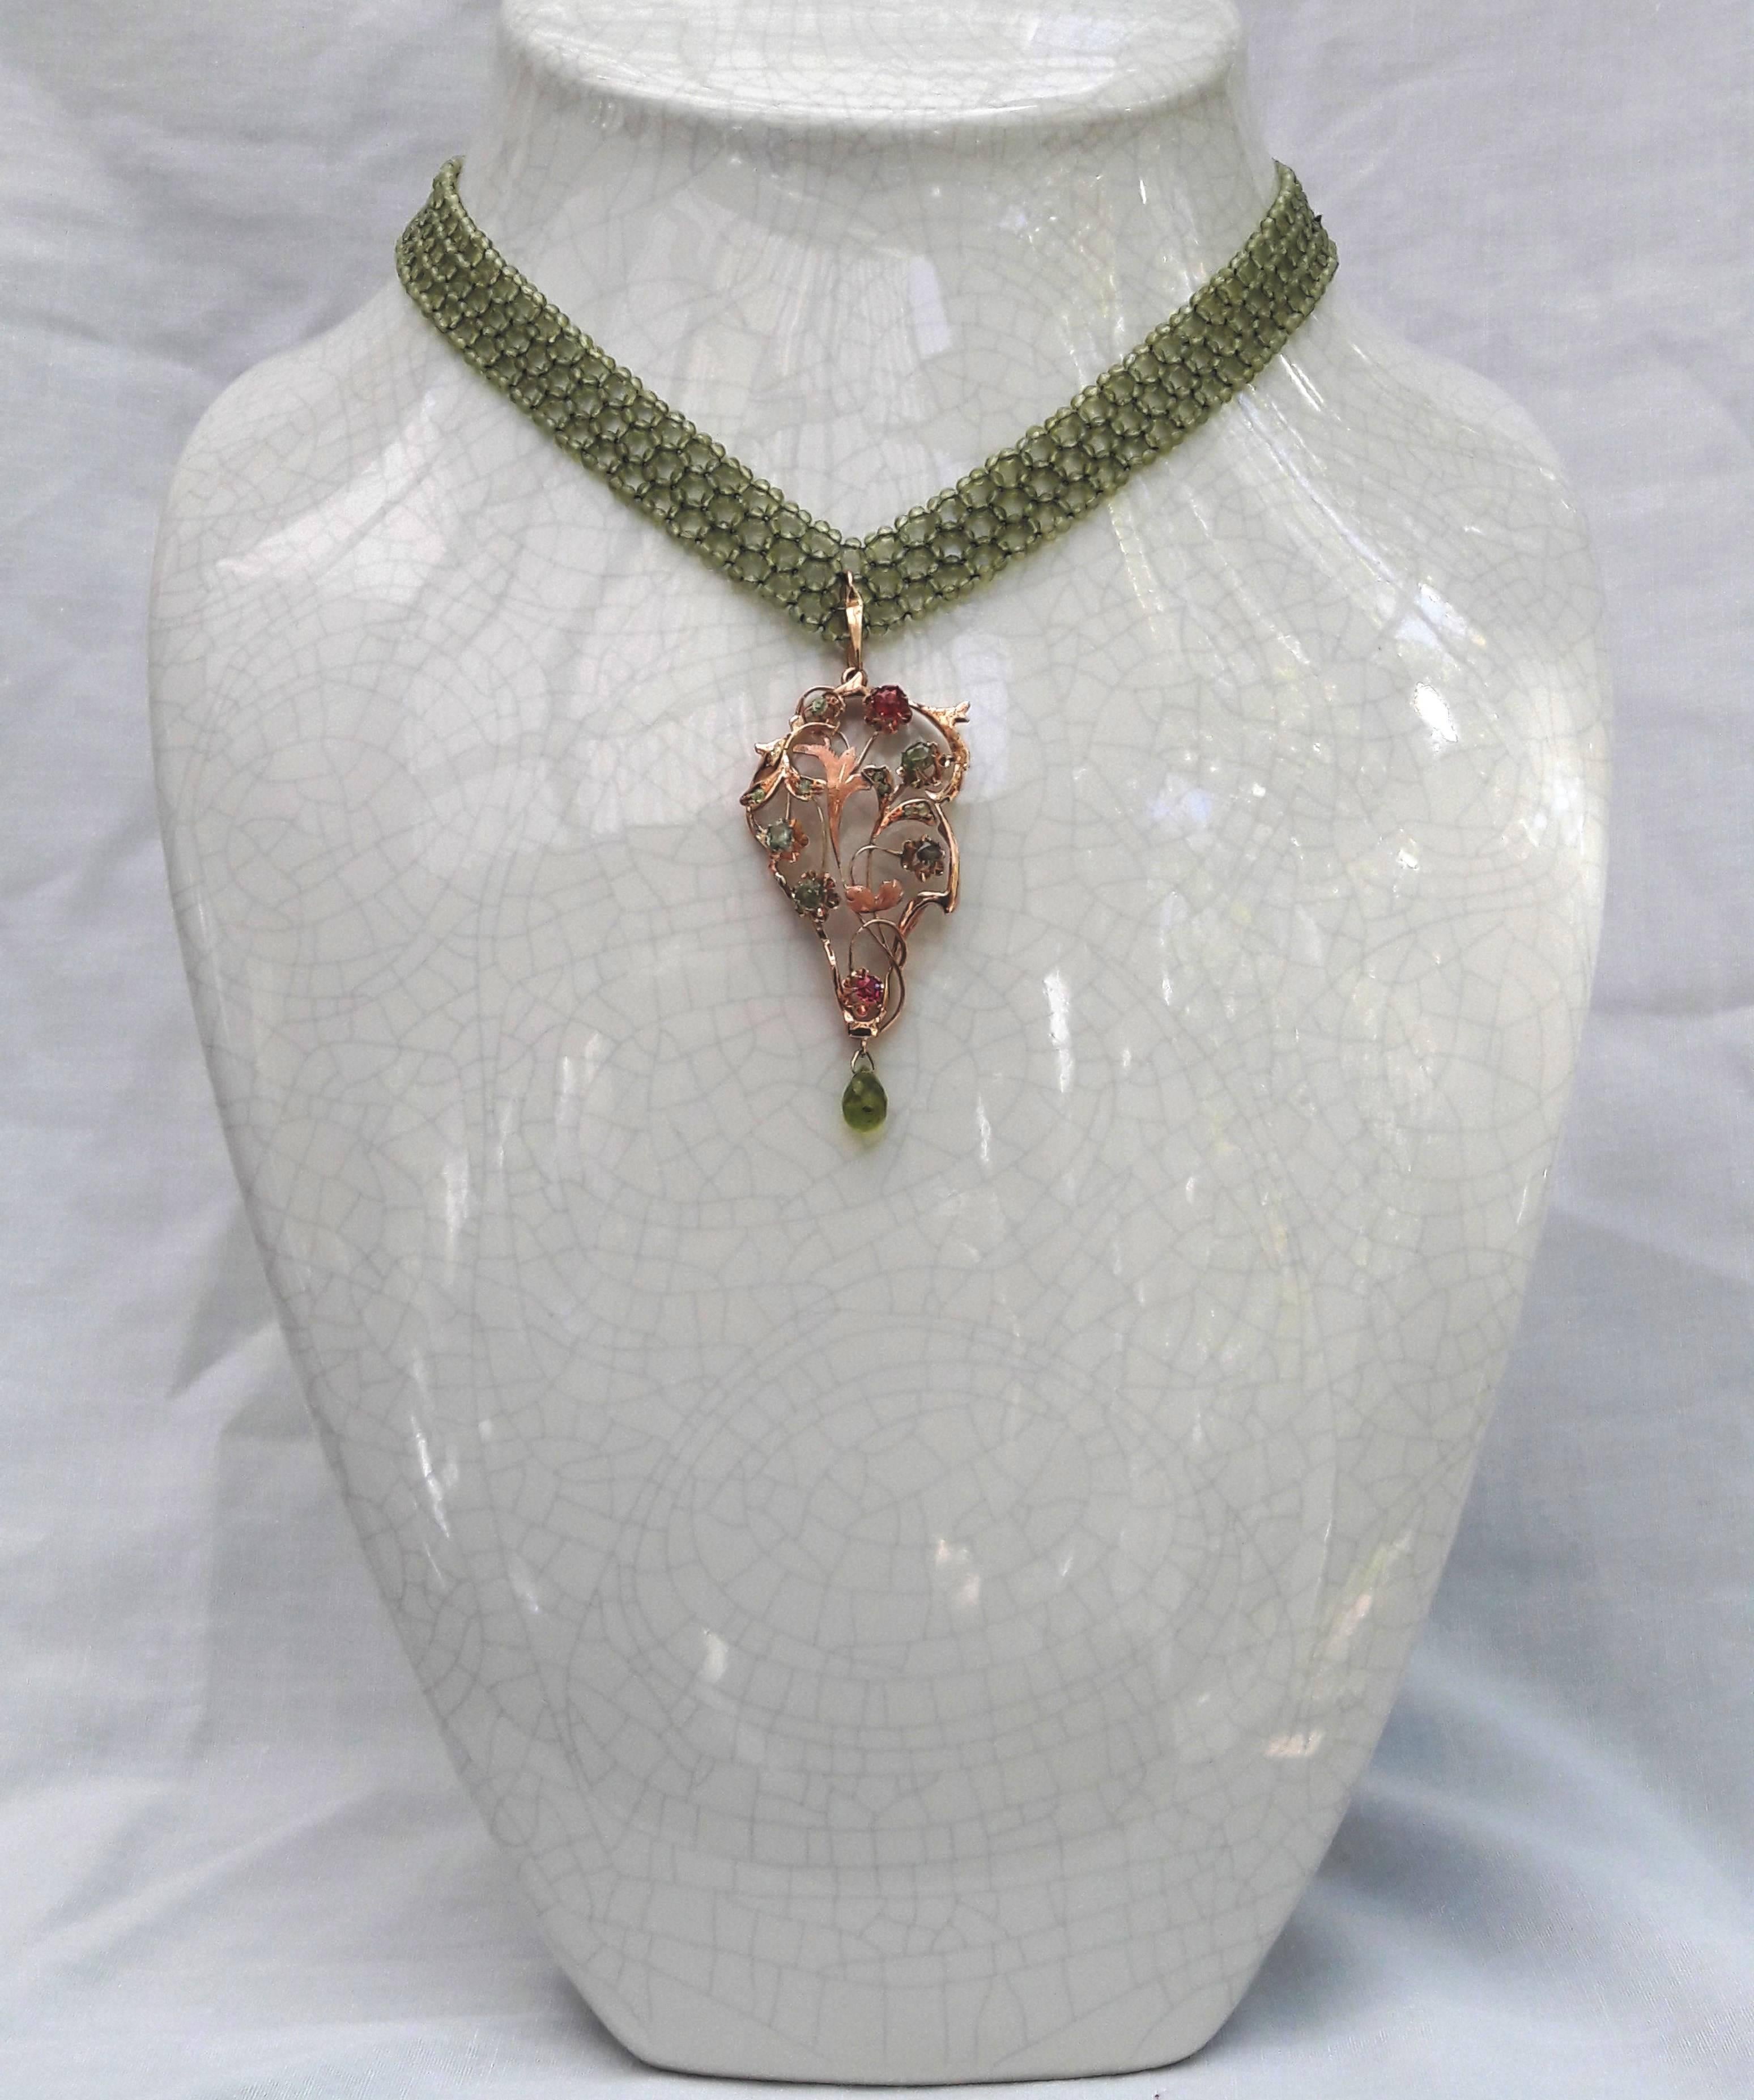 The necklace is composed of fine and faceted 1 mm Peridot beads, and woven into a flat, v-shape ribbon. 

Suspended in the center is a vintage 14 k yellow gold pendant, exquisitely detailed in a floral motif and glistening with faceted Ruby and